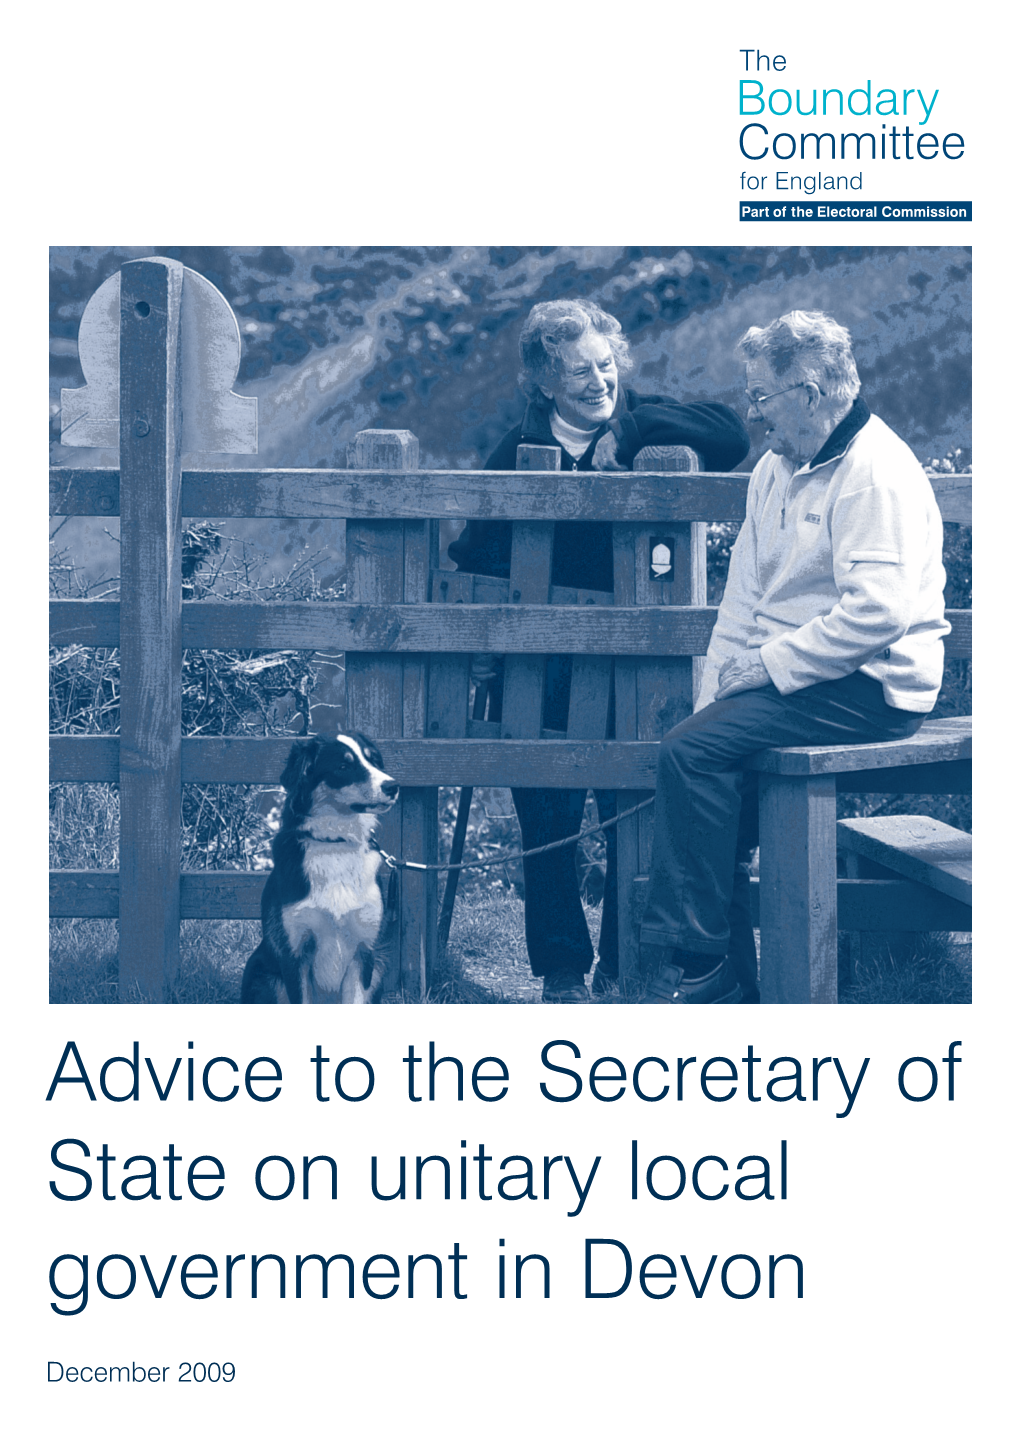 Advice to the Secretary of State on Unitary Local Government in Devon